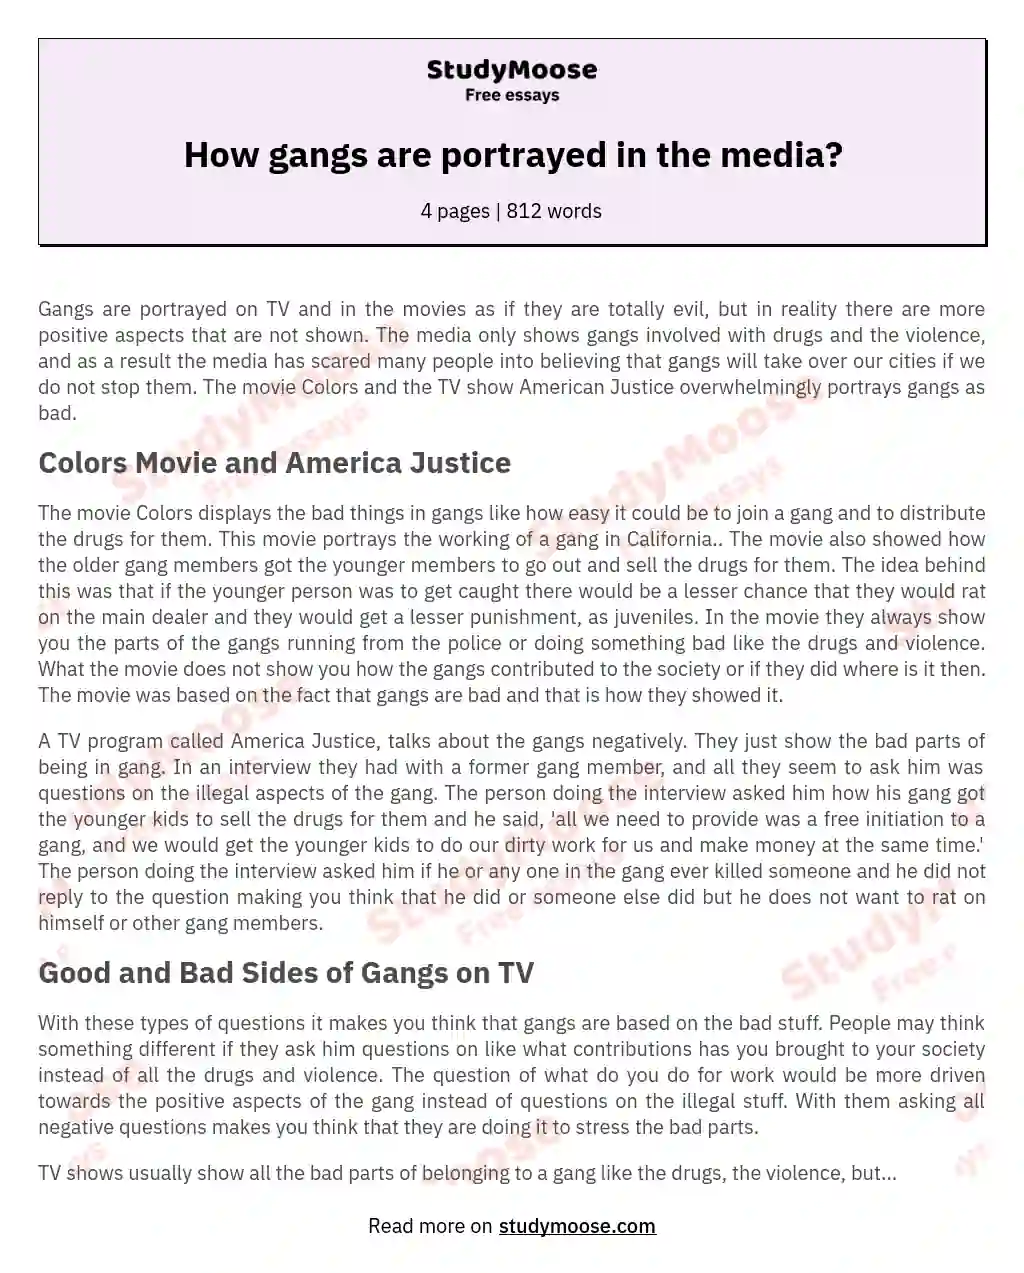 How gangs are portrayed in the media? essay